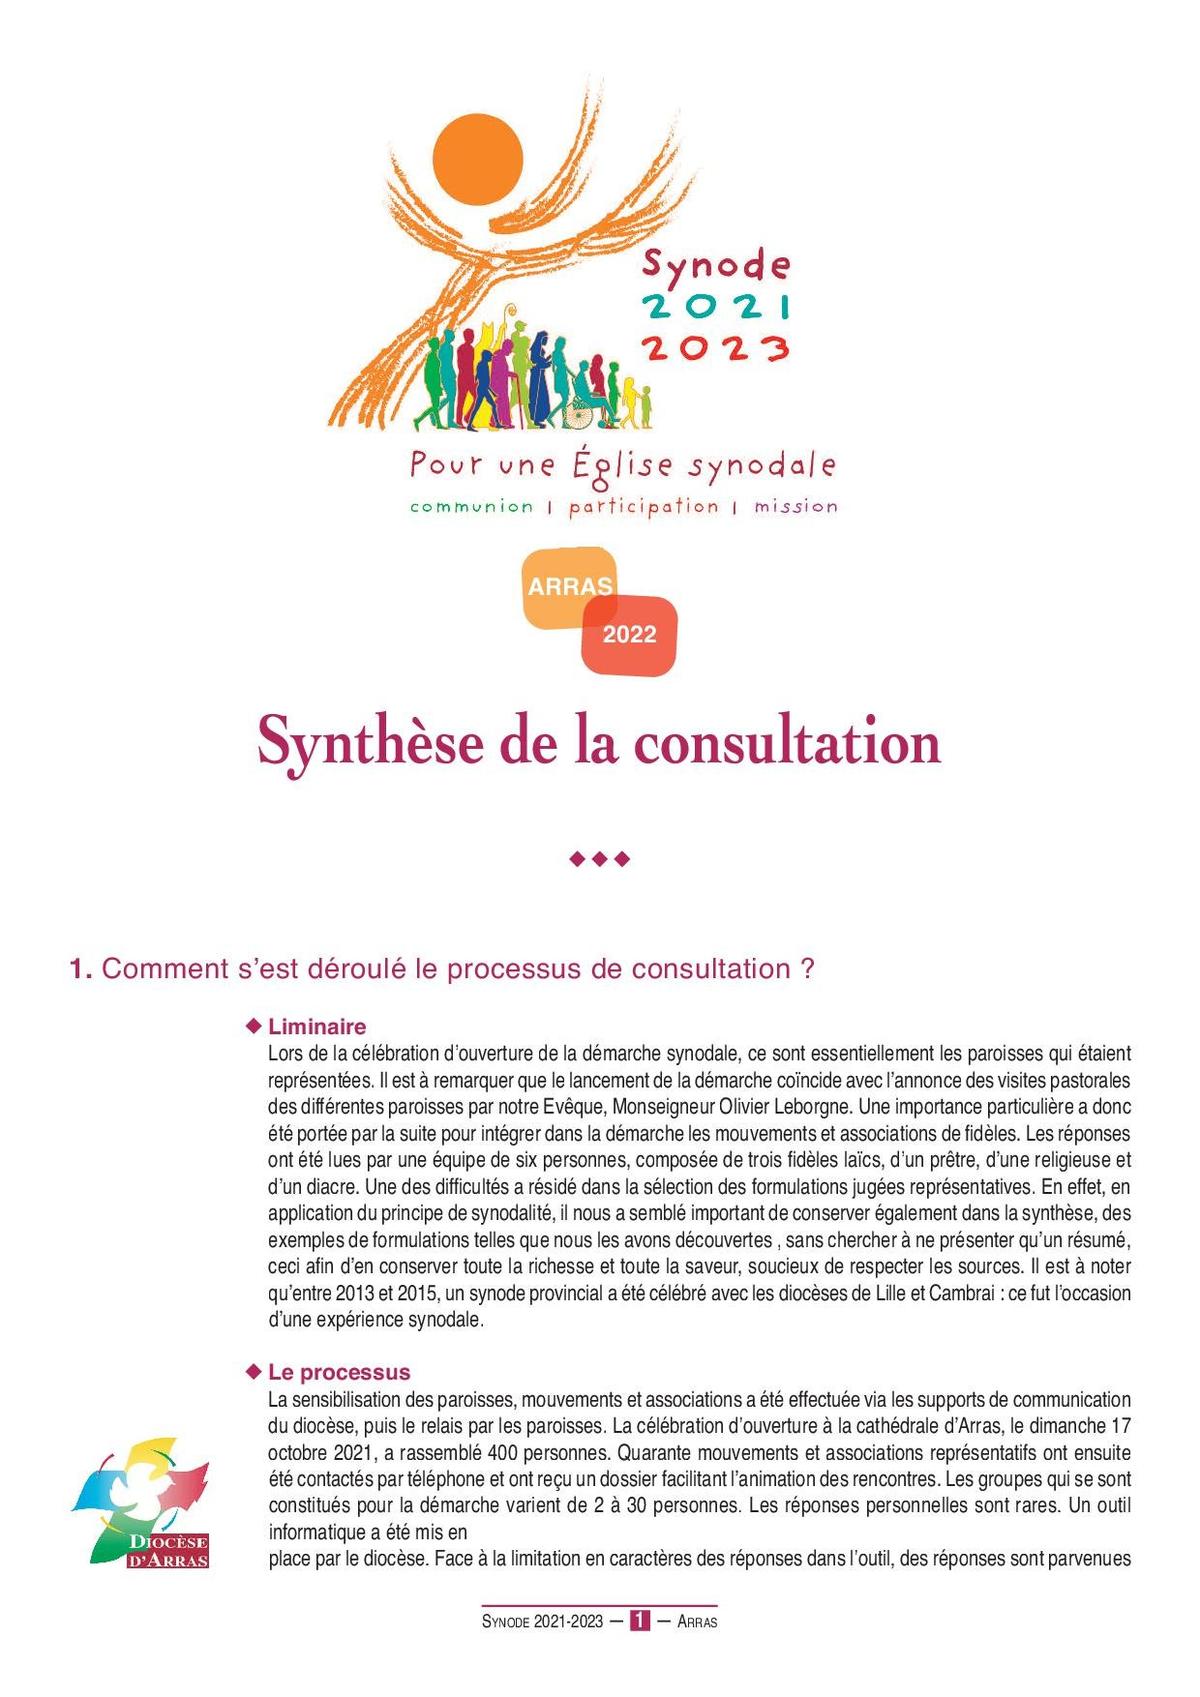 Synode 2023 - Synthe#se diocese d'Arras1